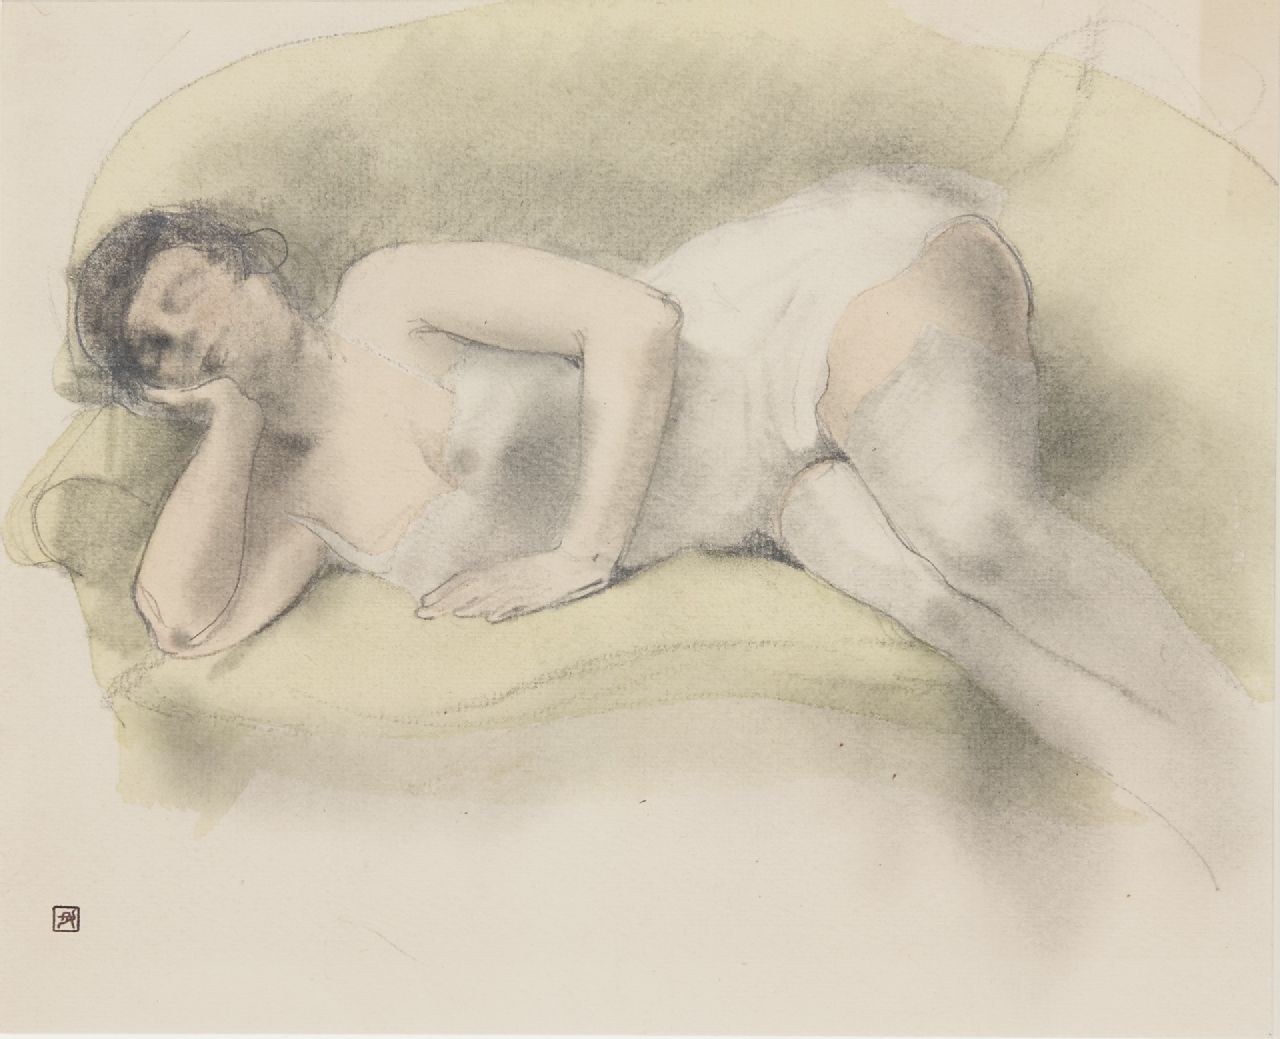 Rassenfosse A.L.  | André Louis 'Armand' Rassenfosse | Watercolours and drawings offered for sale | Nude on a sofa, chalk and watercolour on paper 19.0 x 24.0 cm, signed l.l. with artist's stamp